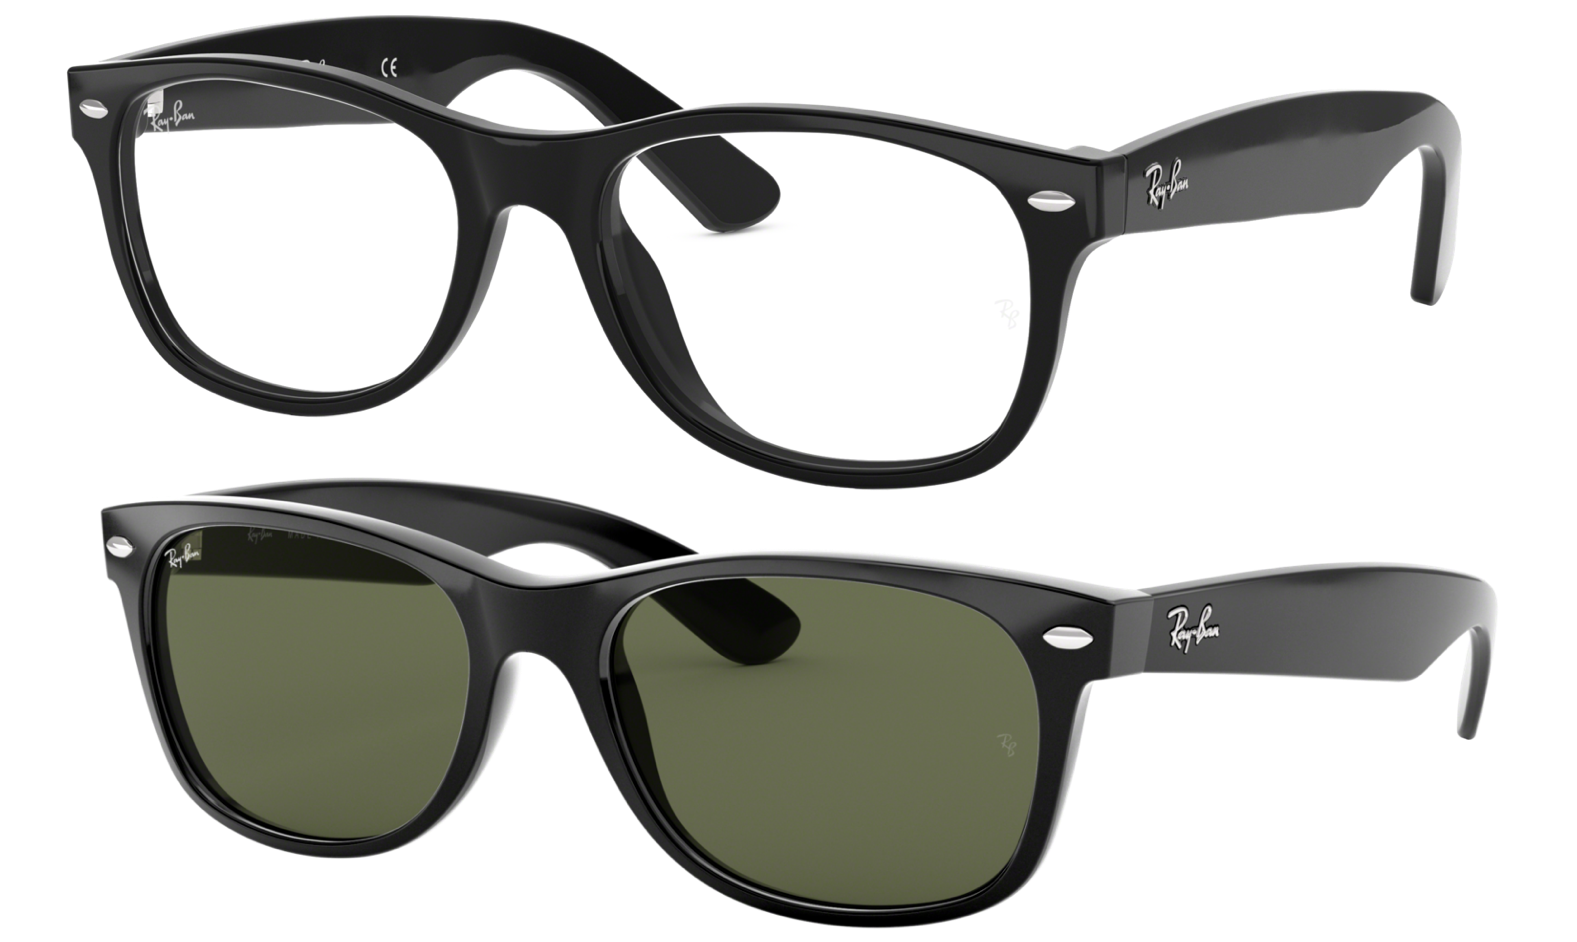 Ray-Ban New Wayfarer sunglasses with clear lenses and tinted lenses.